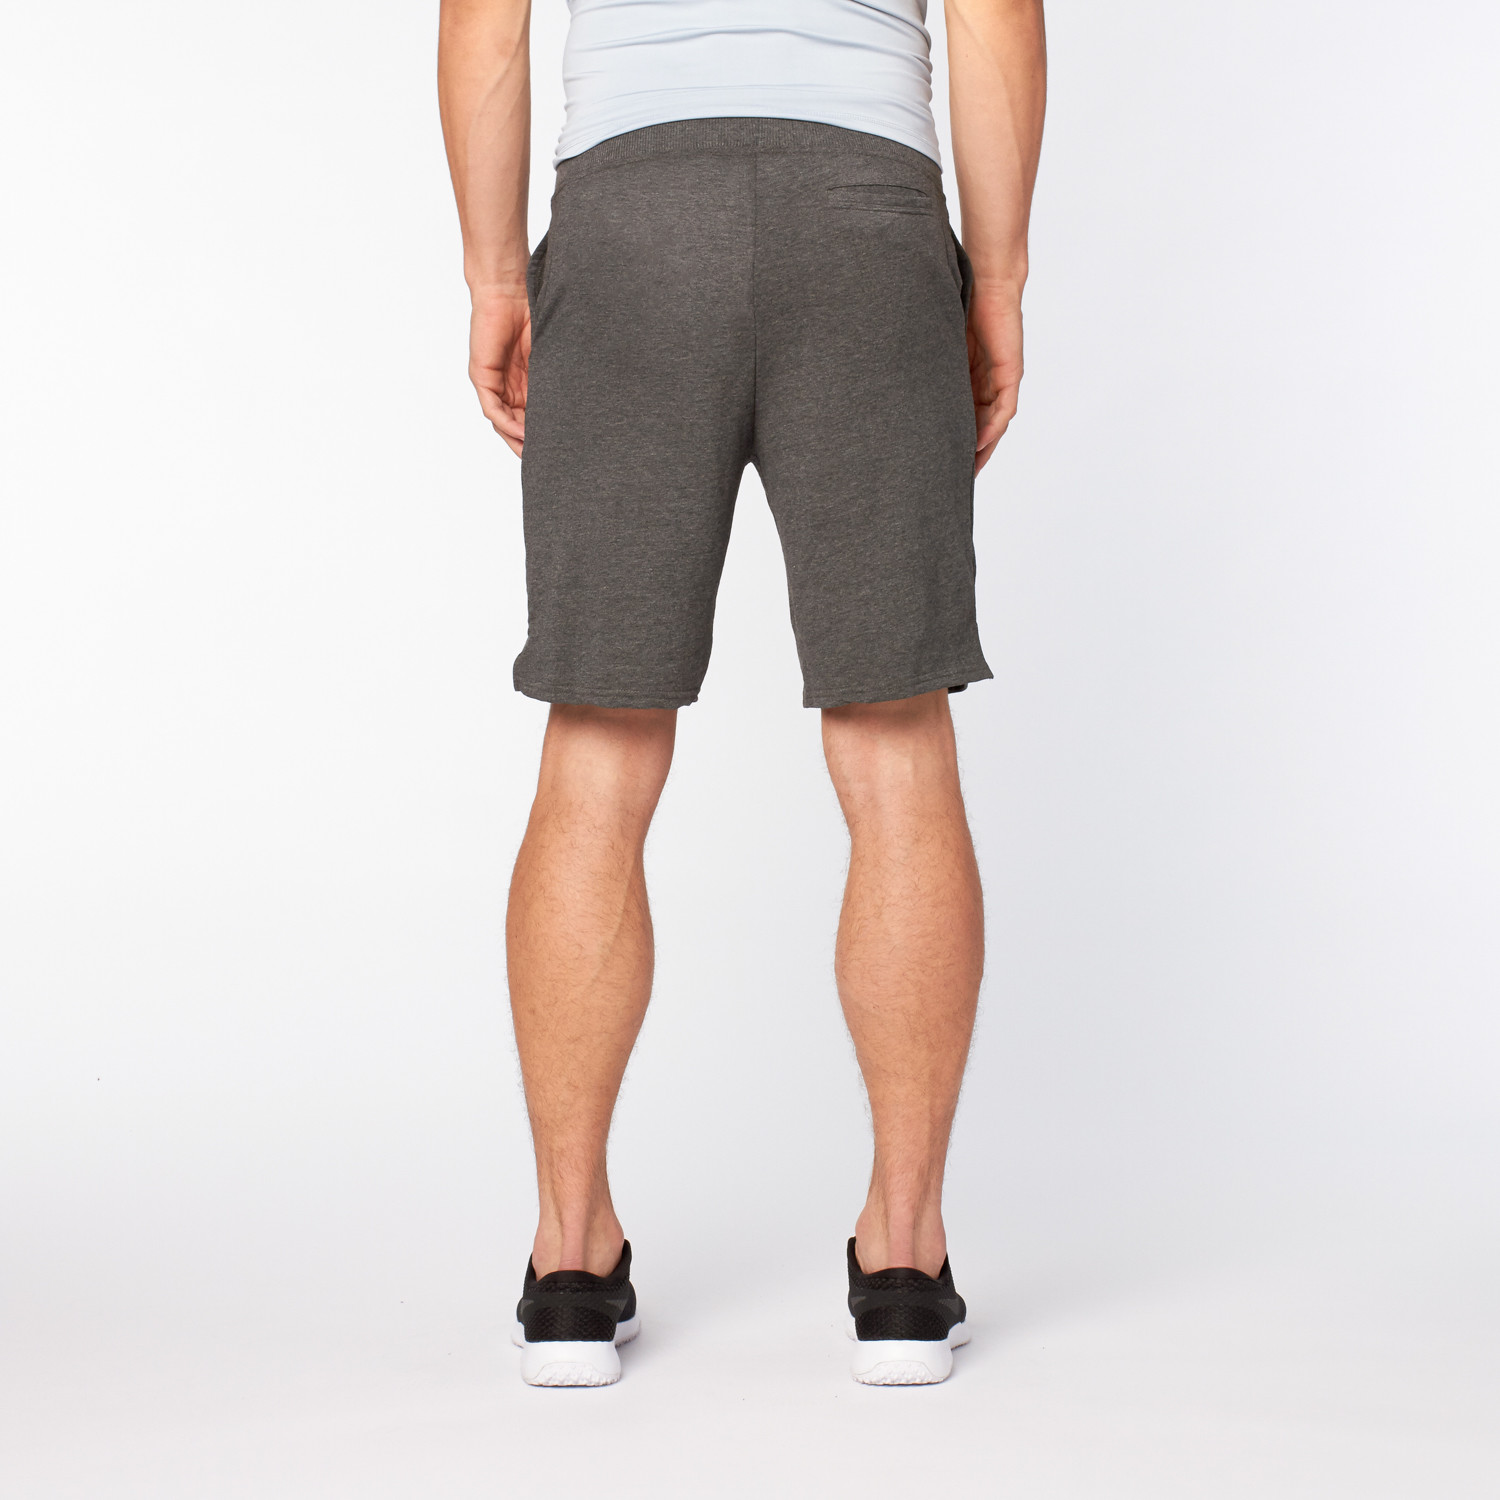 Sweatpant Shorts // Charcoal Heather (XL) - JUXU Sport - Touch of Modern